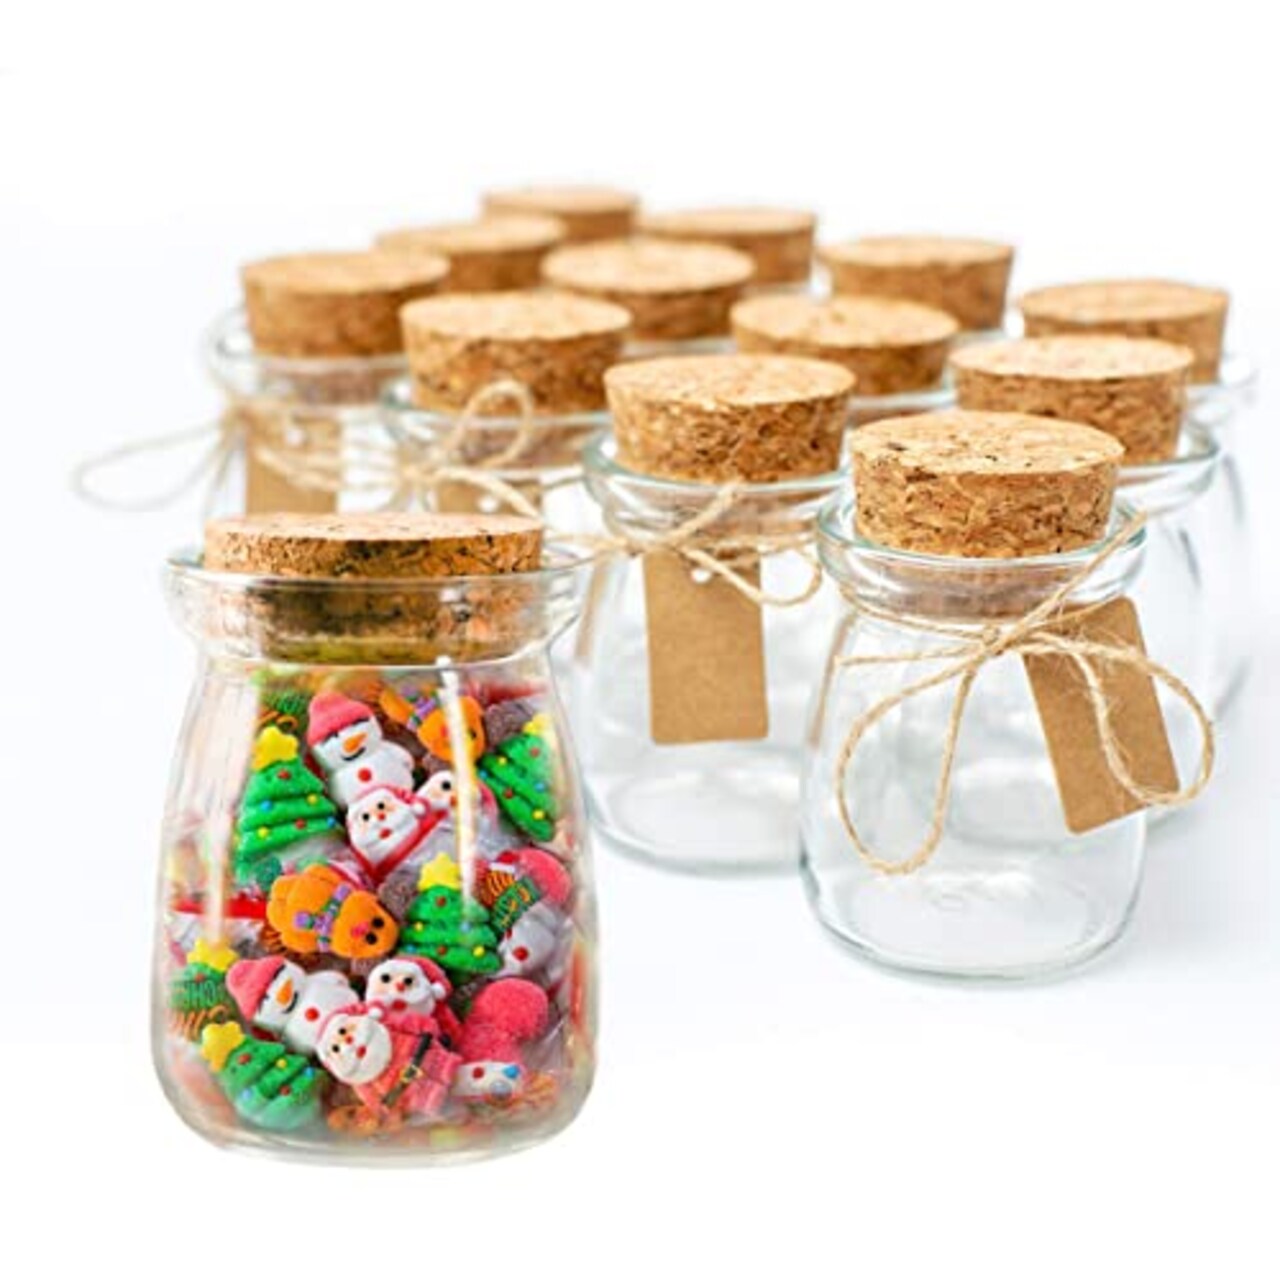 Otis Classic Small Glass Jars with Lids - Set of 12 Jars w/ 20 Labels and  15ft of Twine for Christmas New Year Decor, Wedding and Party Favors,  Apothecary, DIY Crafts, Food